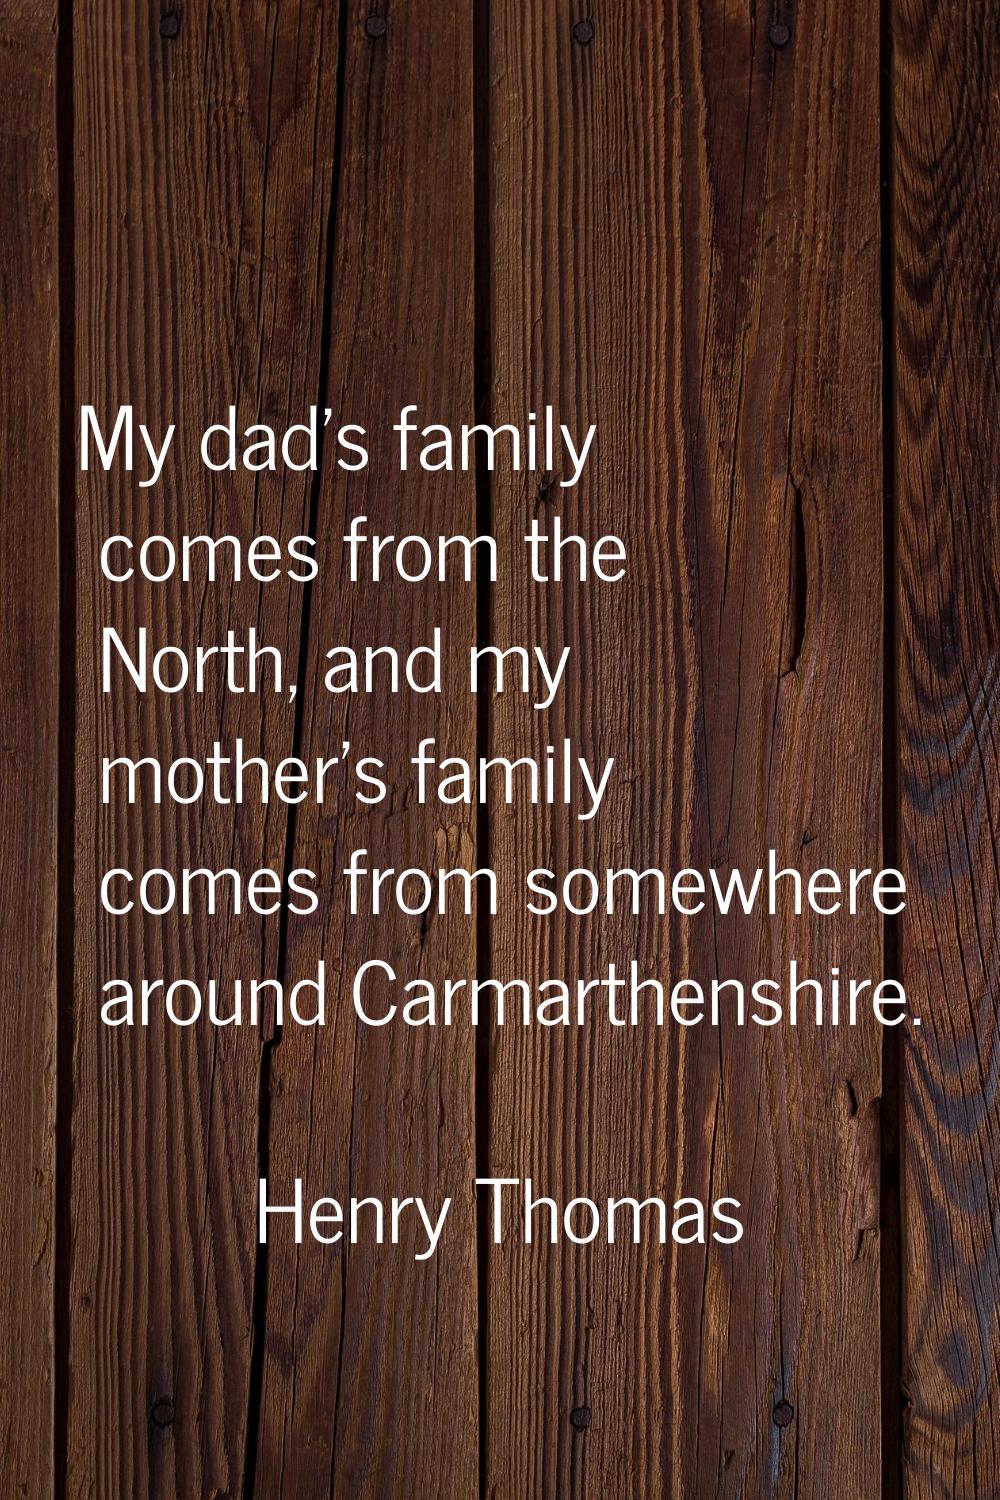 My dad's family comes from the North, and my mother's family comes from somewhere around Carmarthen